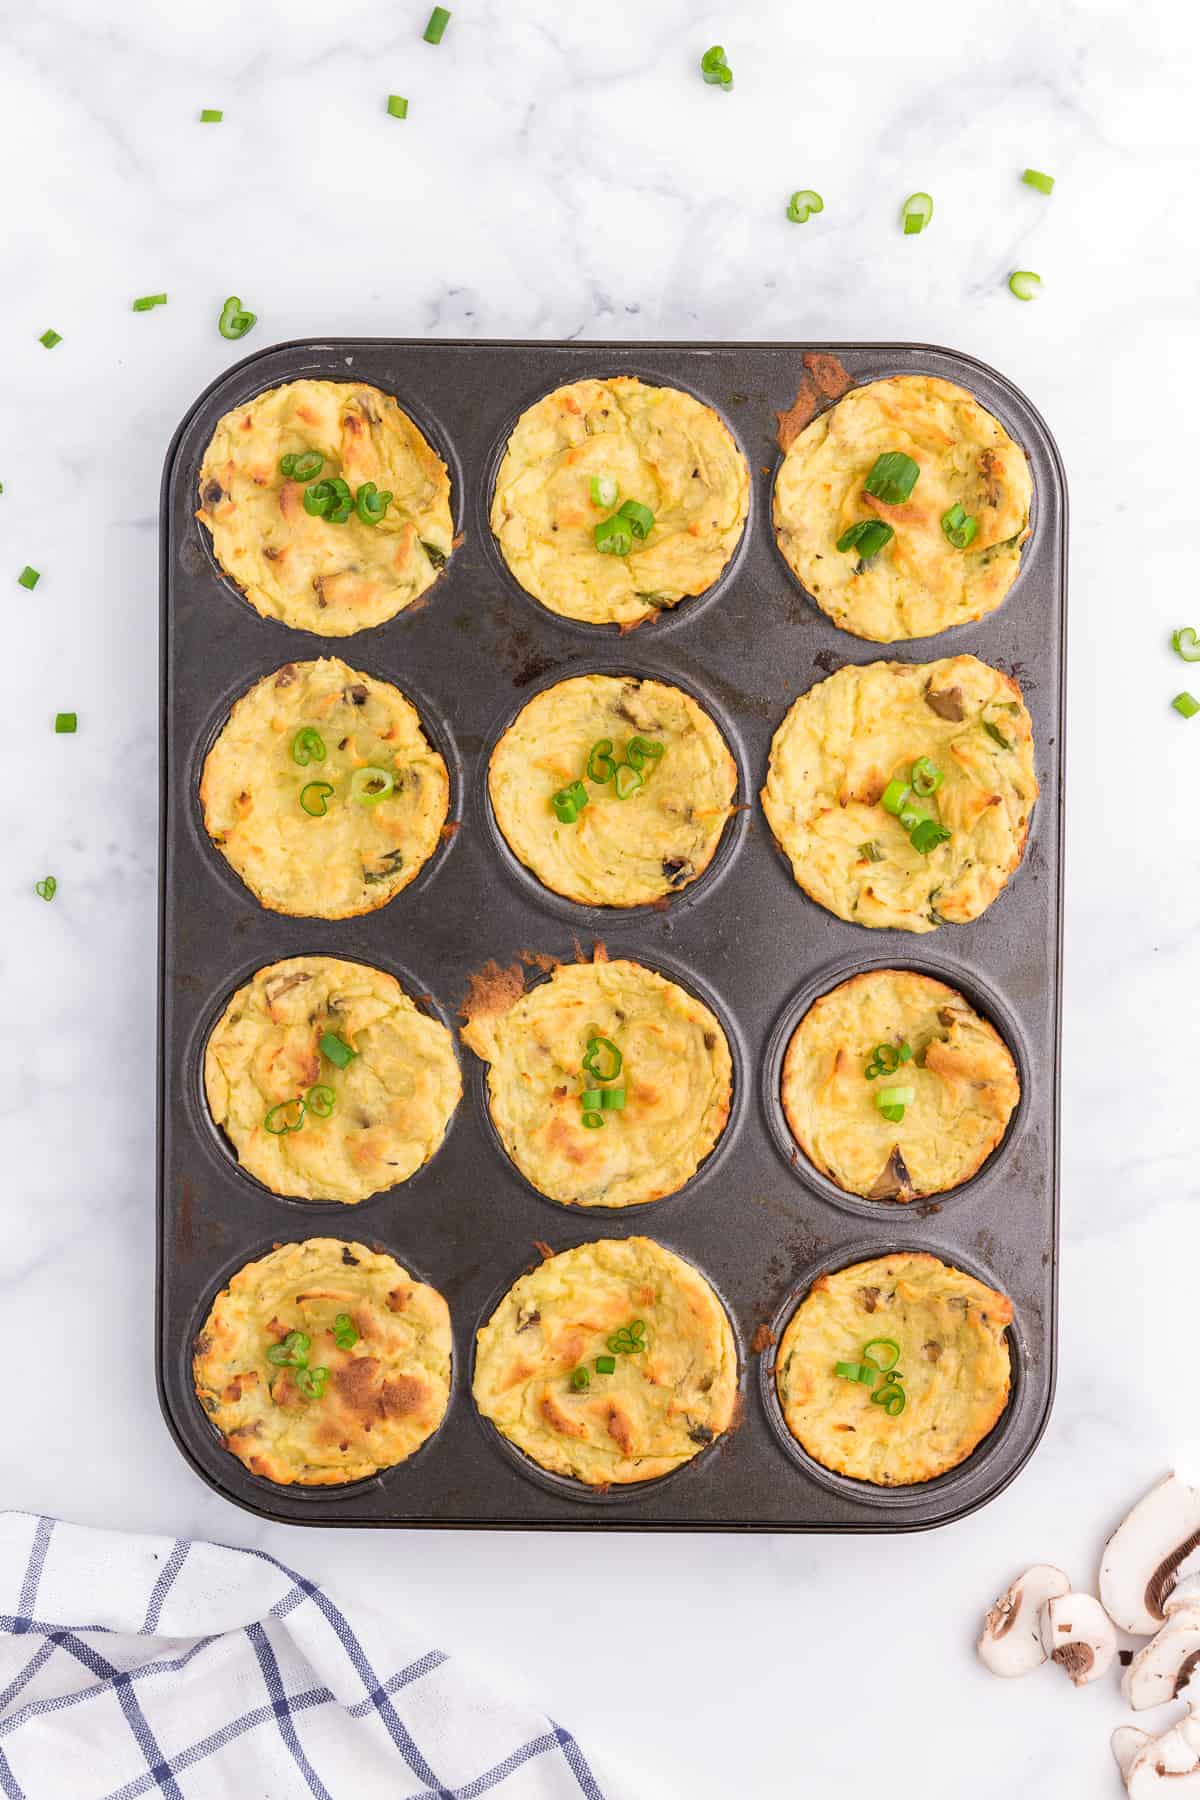 Muffin Tin Mashed Potatoes - Perfect for dinner parties! These loaded mashed potatoes are baked like savory cupcakes with mushrooms and green onions. The best way to use up leftover mashed potatoes!